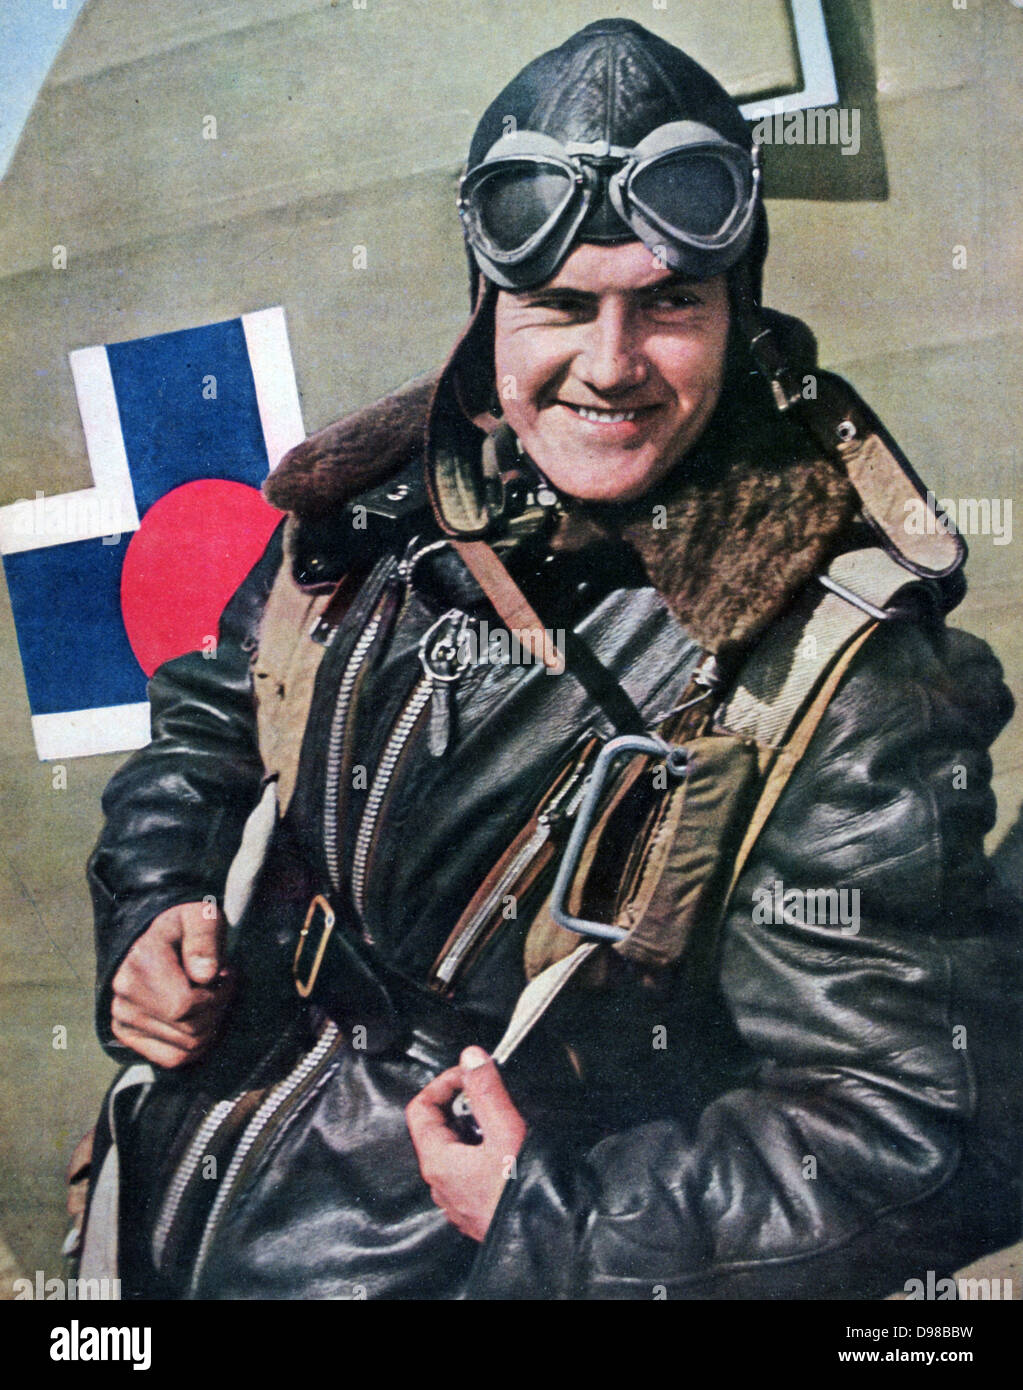 World War II 1939-1945: Slovakian pilot serving with the German air force. From 'Signal', August 1942, German propaganda magazine produced by the Wehrmacht. Stock Photo